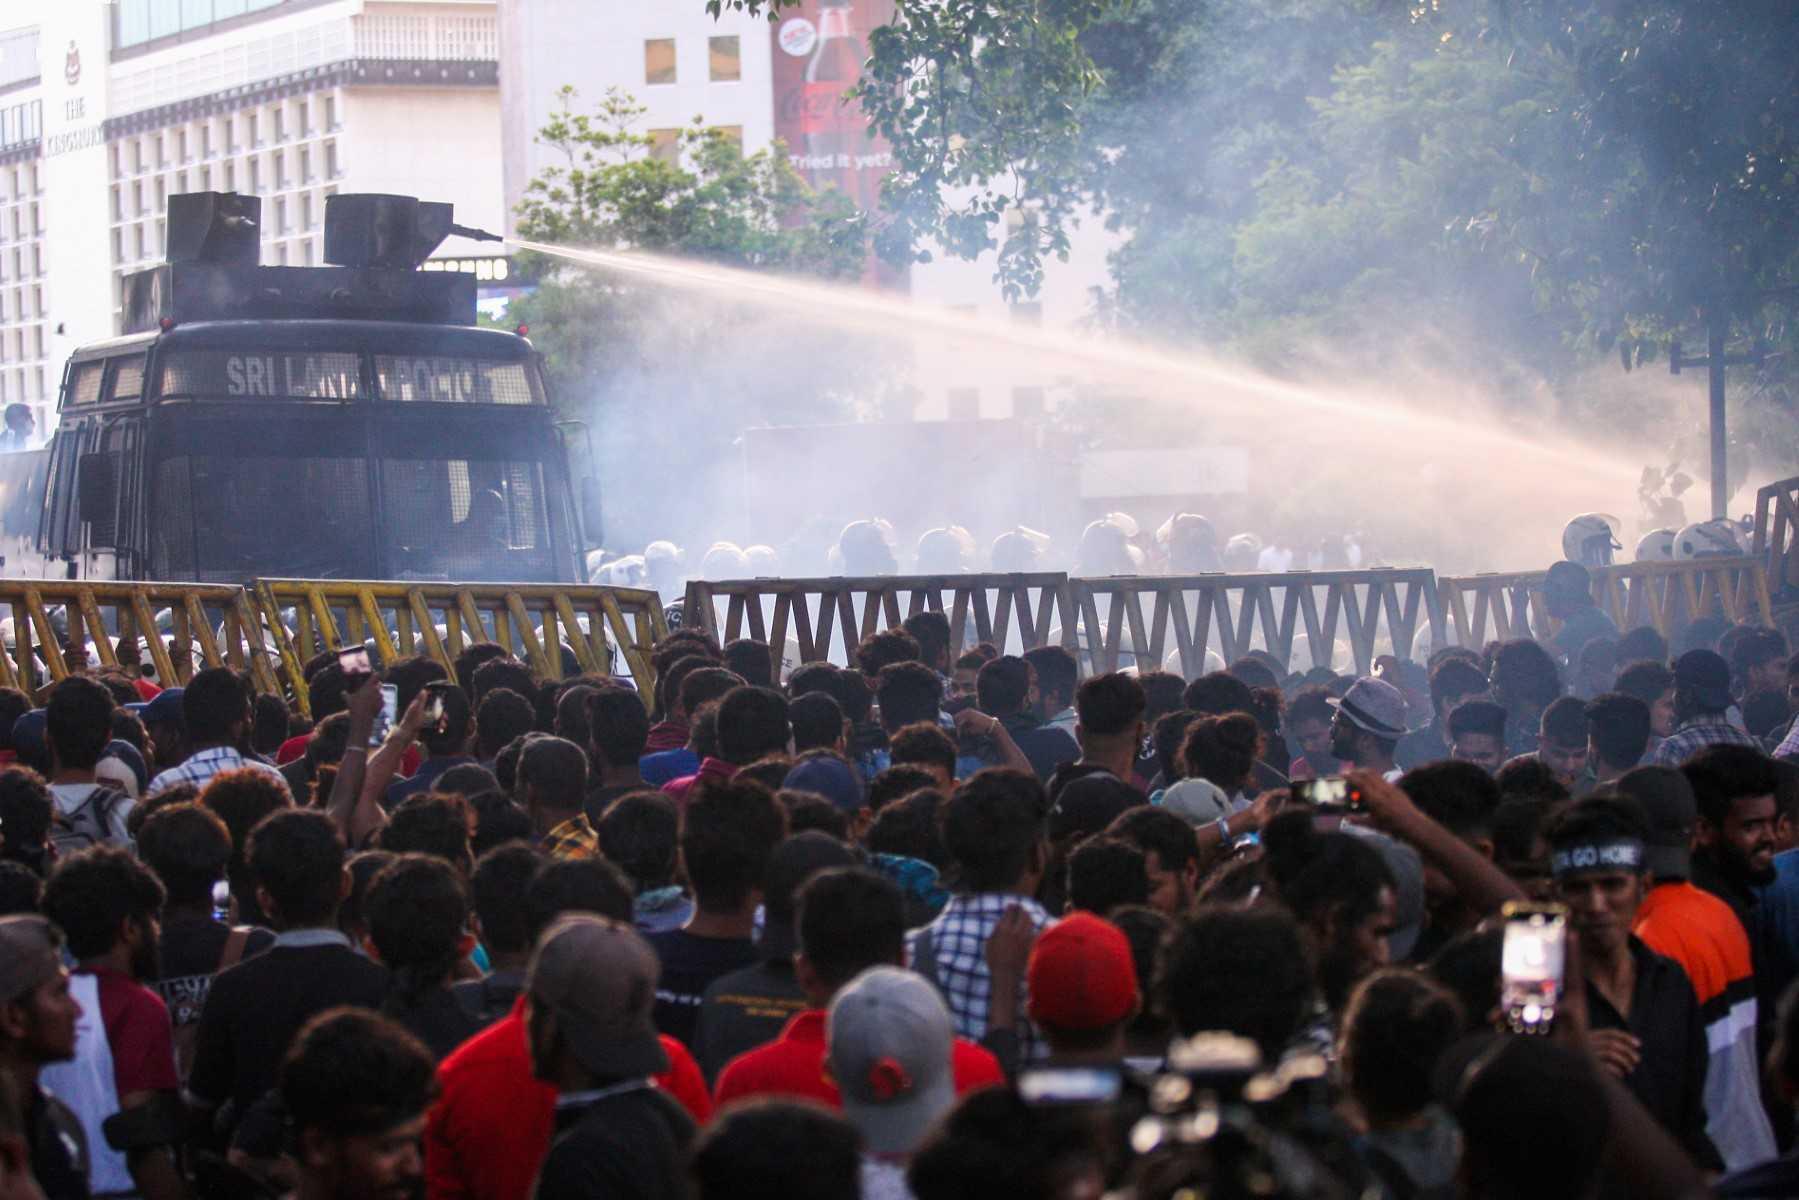 Police use a water canon to disperse demonstrators taking part in an anti-government protest demanding the resignation of Sri Lanka's President Gotabaya Rajapaksa over the country's crippling economic crisis, in Colombo on July 8. Photo: AFP